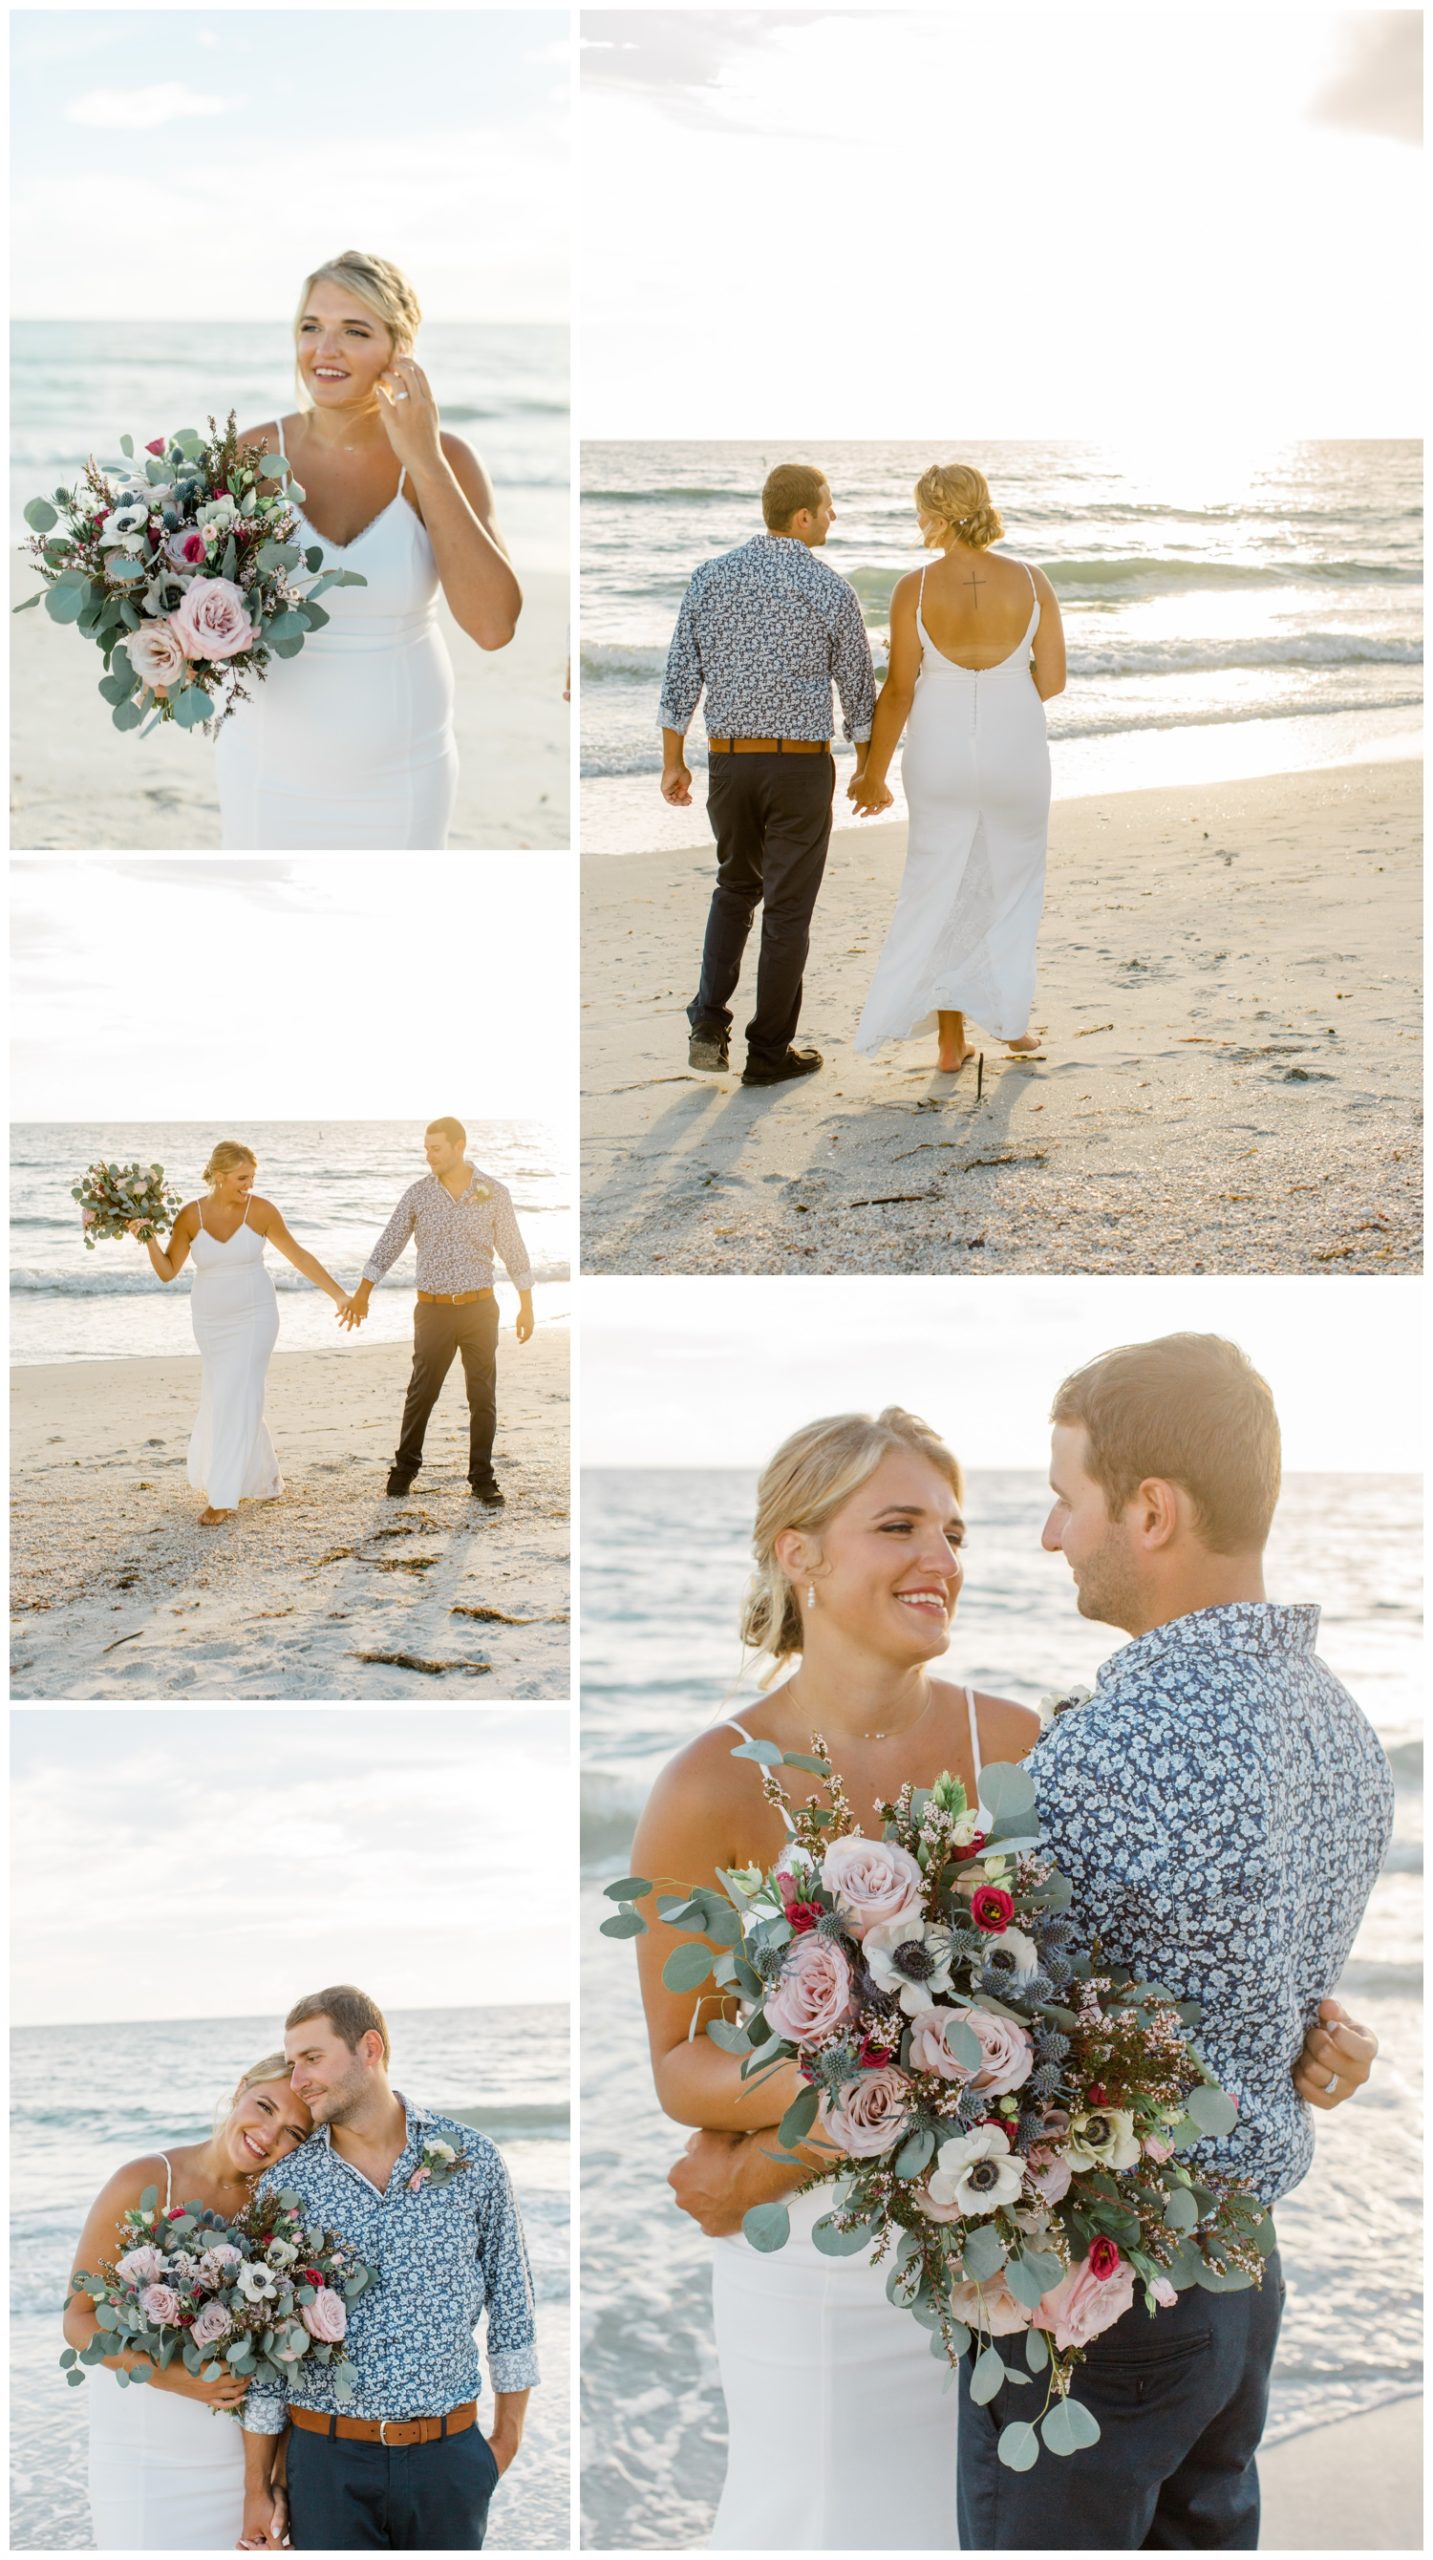 Elopement at Sunset Beach - Couples photos on the beach - Elizabeth Baxter Photography, Lasting Luxe, Arms of Persephone